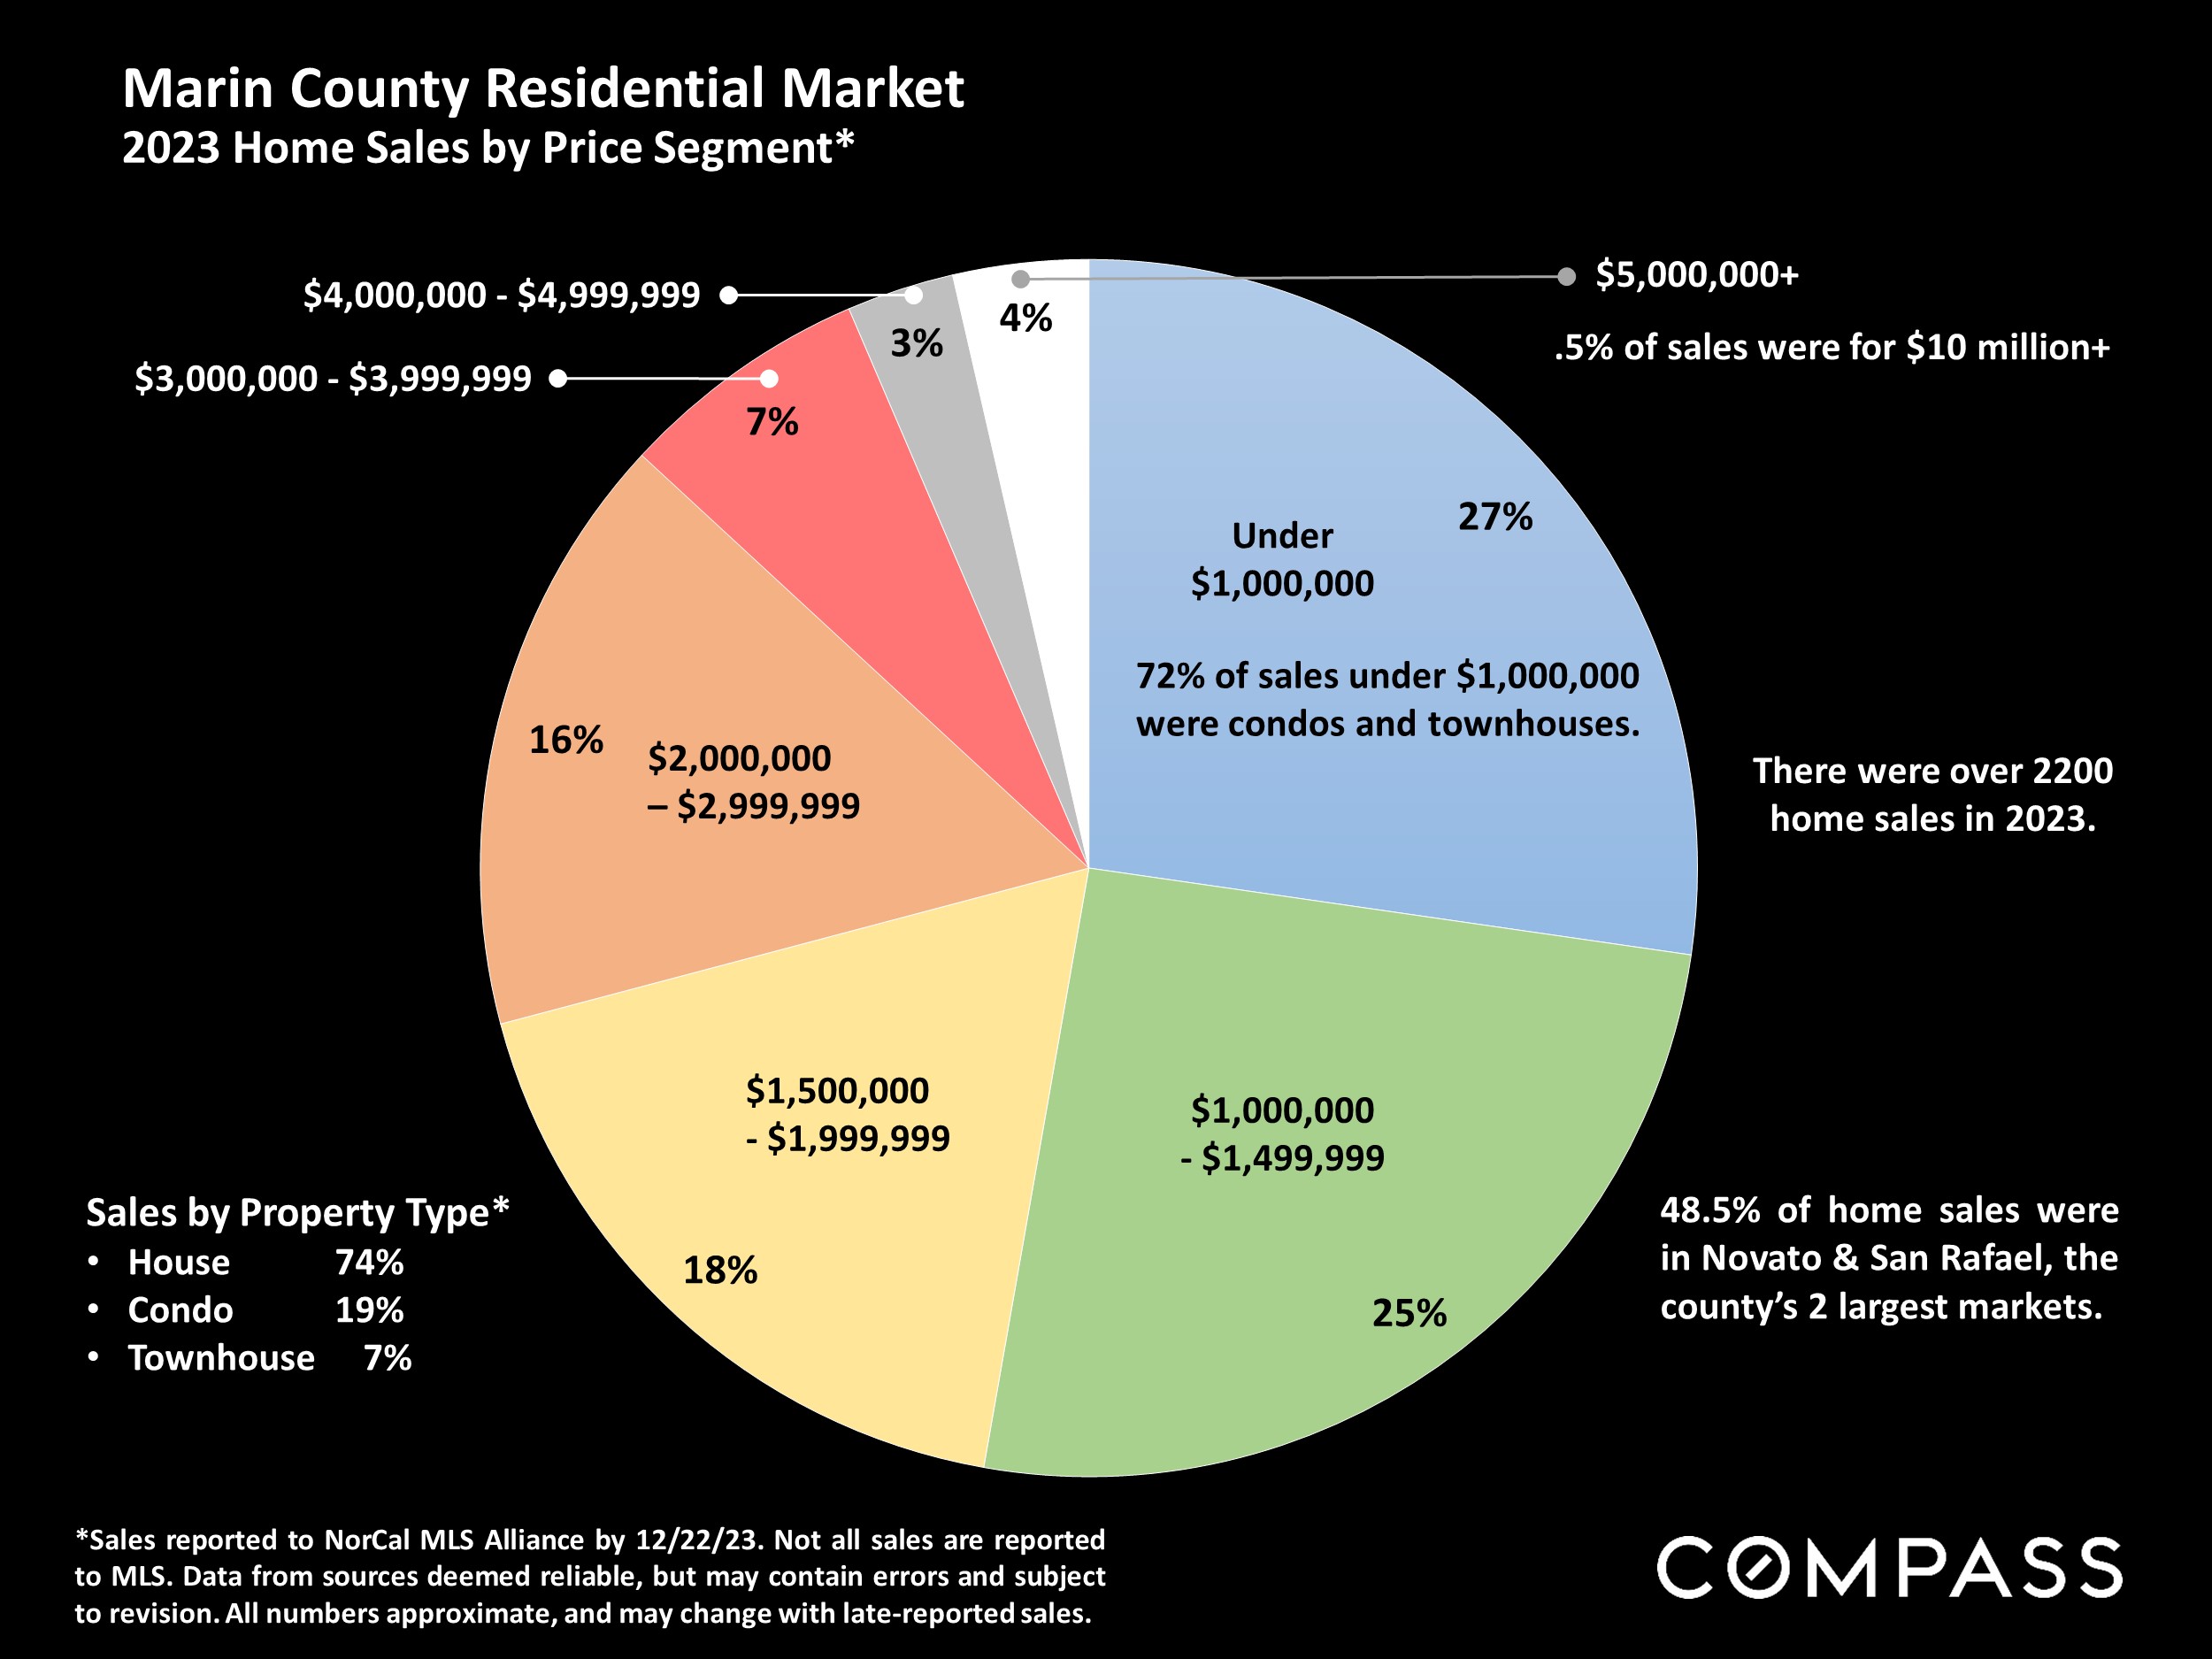 Marin County Residential Market 2023 Home Sales by Price Segment*